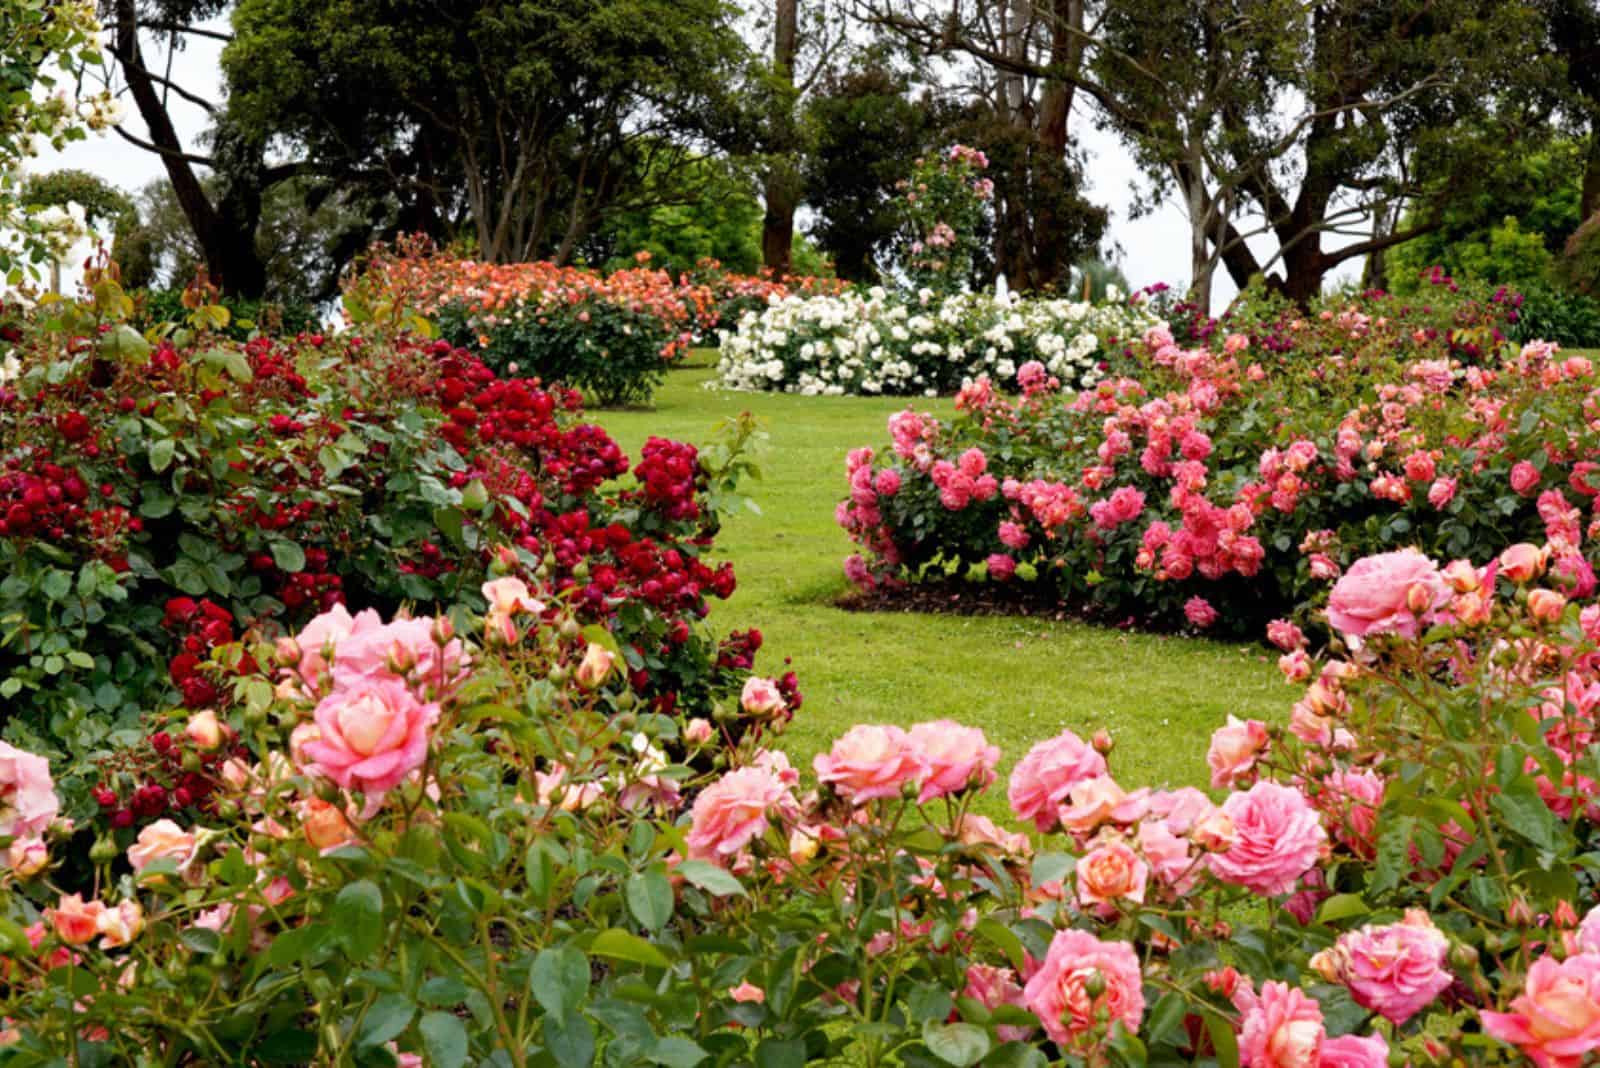 Beautiful display of roses in a large garden setting